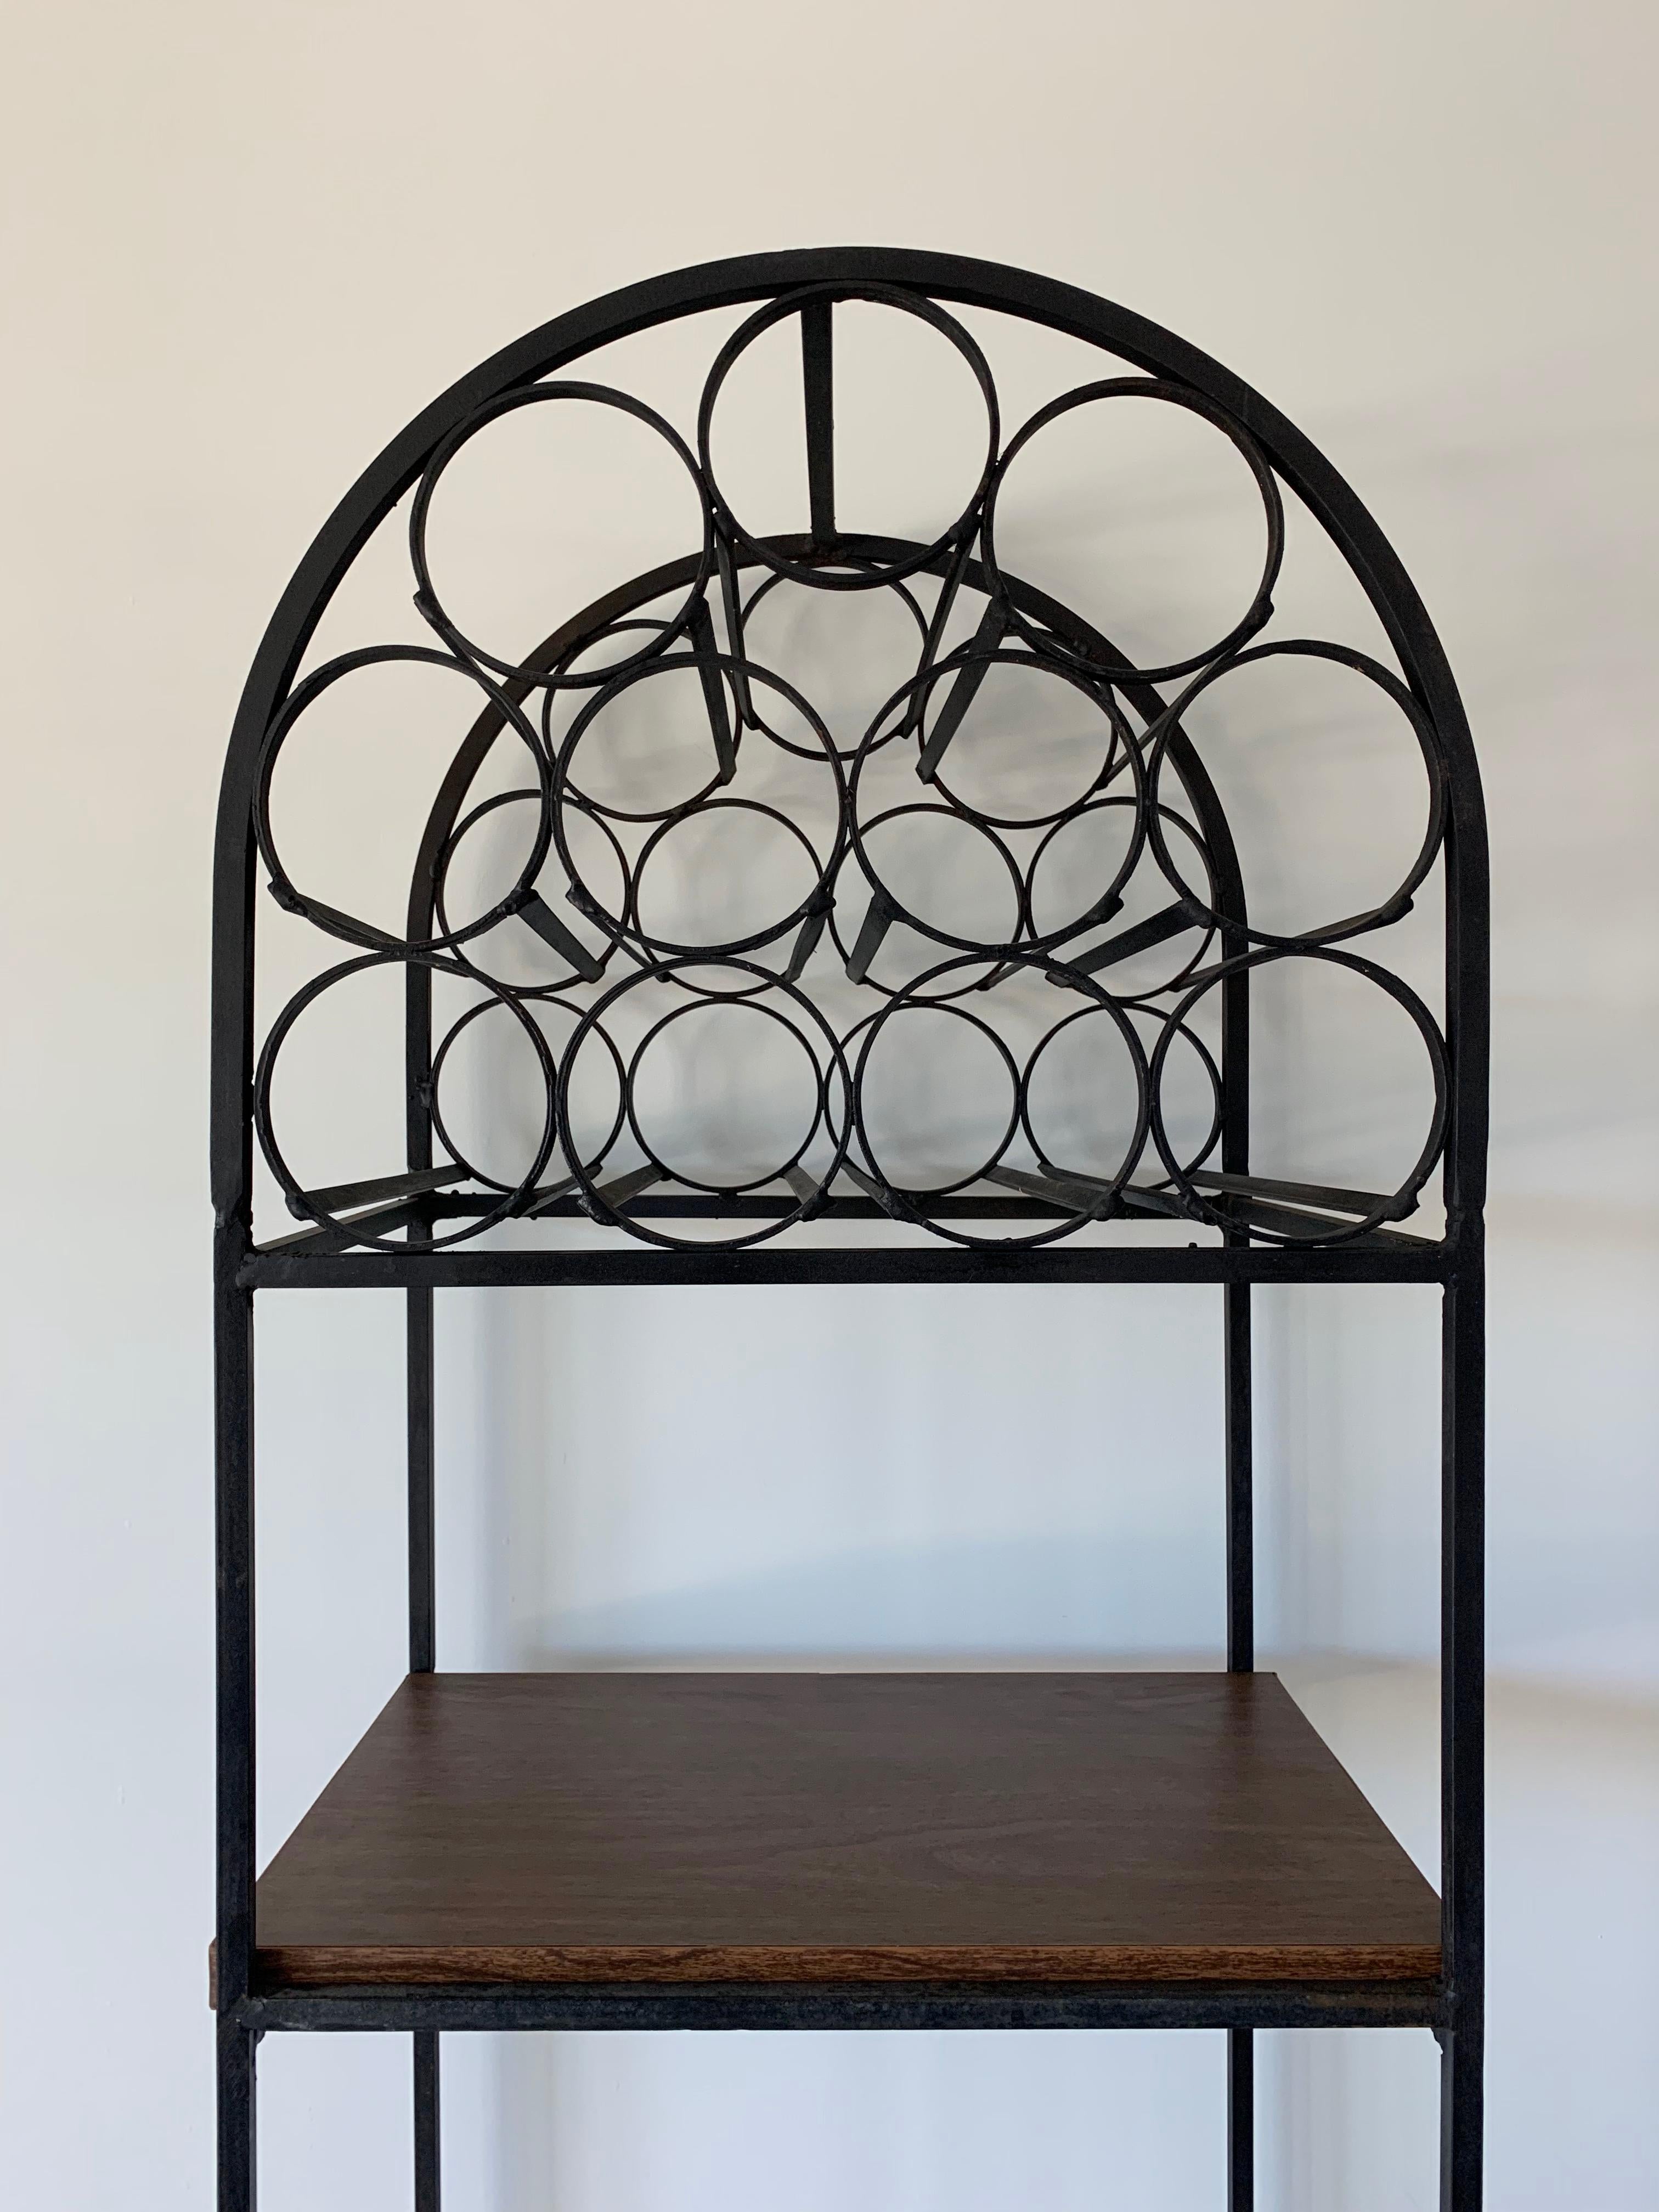 A black wrought iron wine rack by Arthur Umanoff.
It can hold up to 39 bottles and includes a woven basket type shelf and a laminated shelf to hold glasses, serve drinks or even showcase you favorite bottles and bar utensils.
Manufactured for the